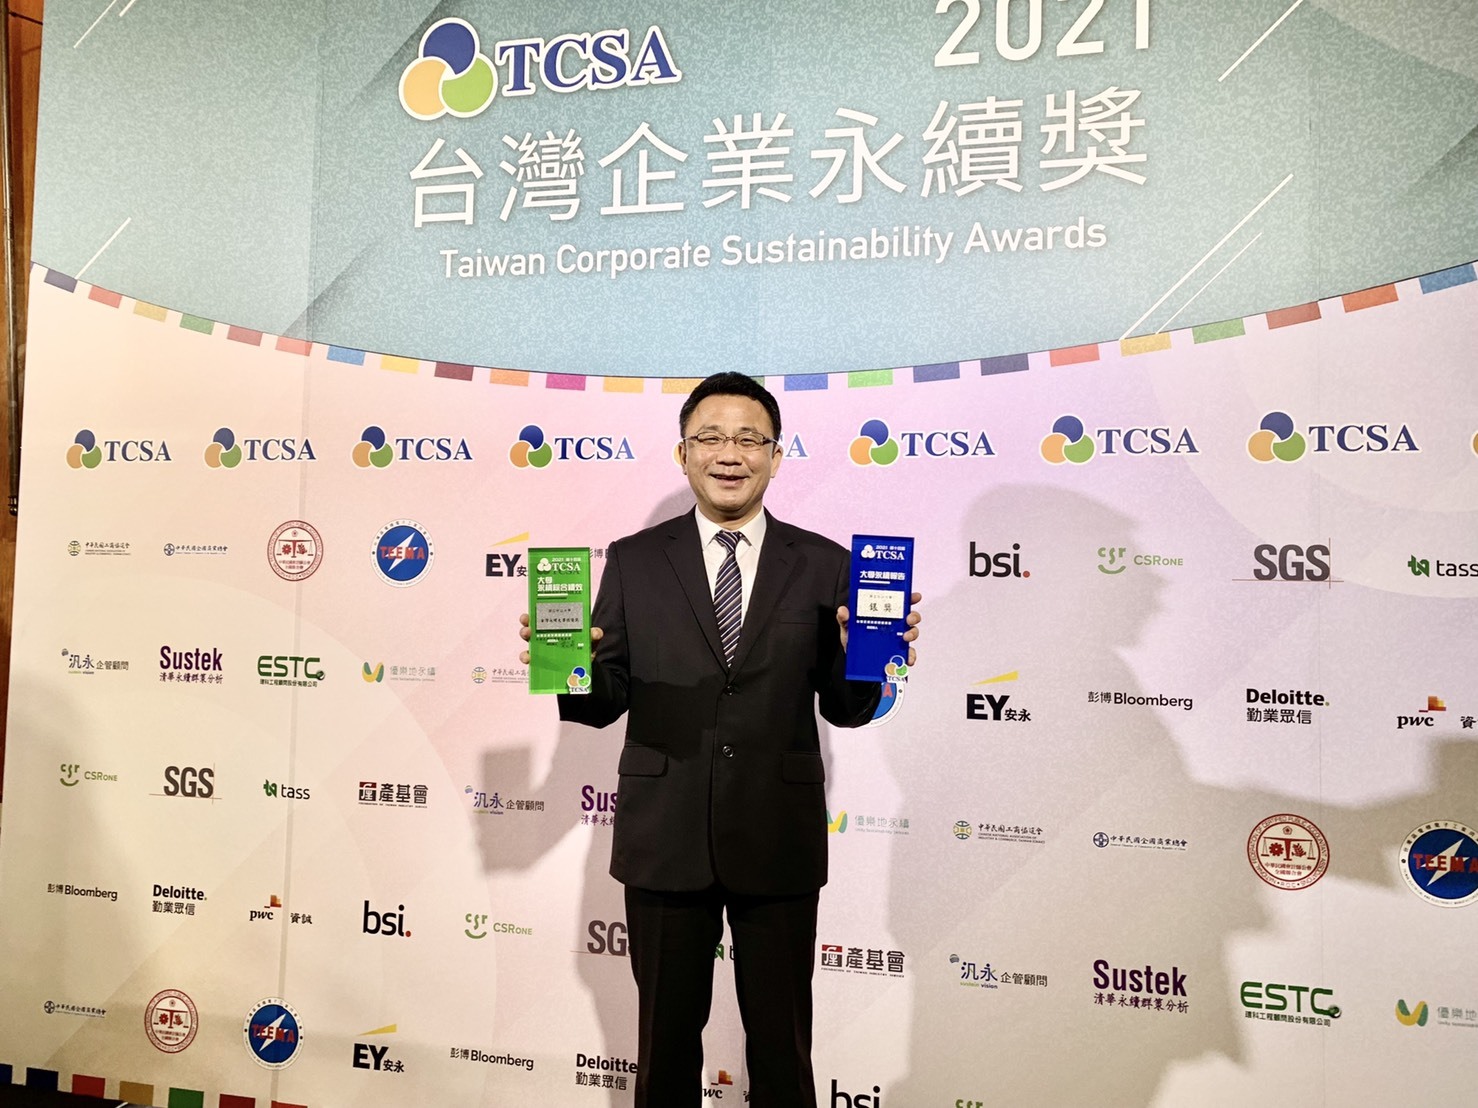 NSYSU was recognized again for its efforts in the promotion of campus sustainability with TCSA’s (Taiwan Corporate Sustainability Action Awards) University Outstanding Performance Award and a silver medal for its Sustainability Report. The awards were conferred in a ceremony to NSYSU’s Senior Vice President I-Yu Huang.